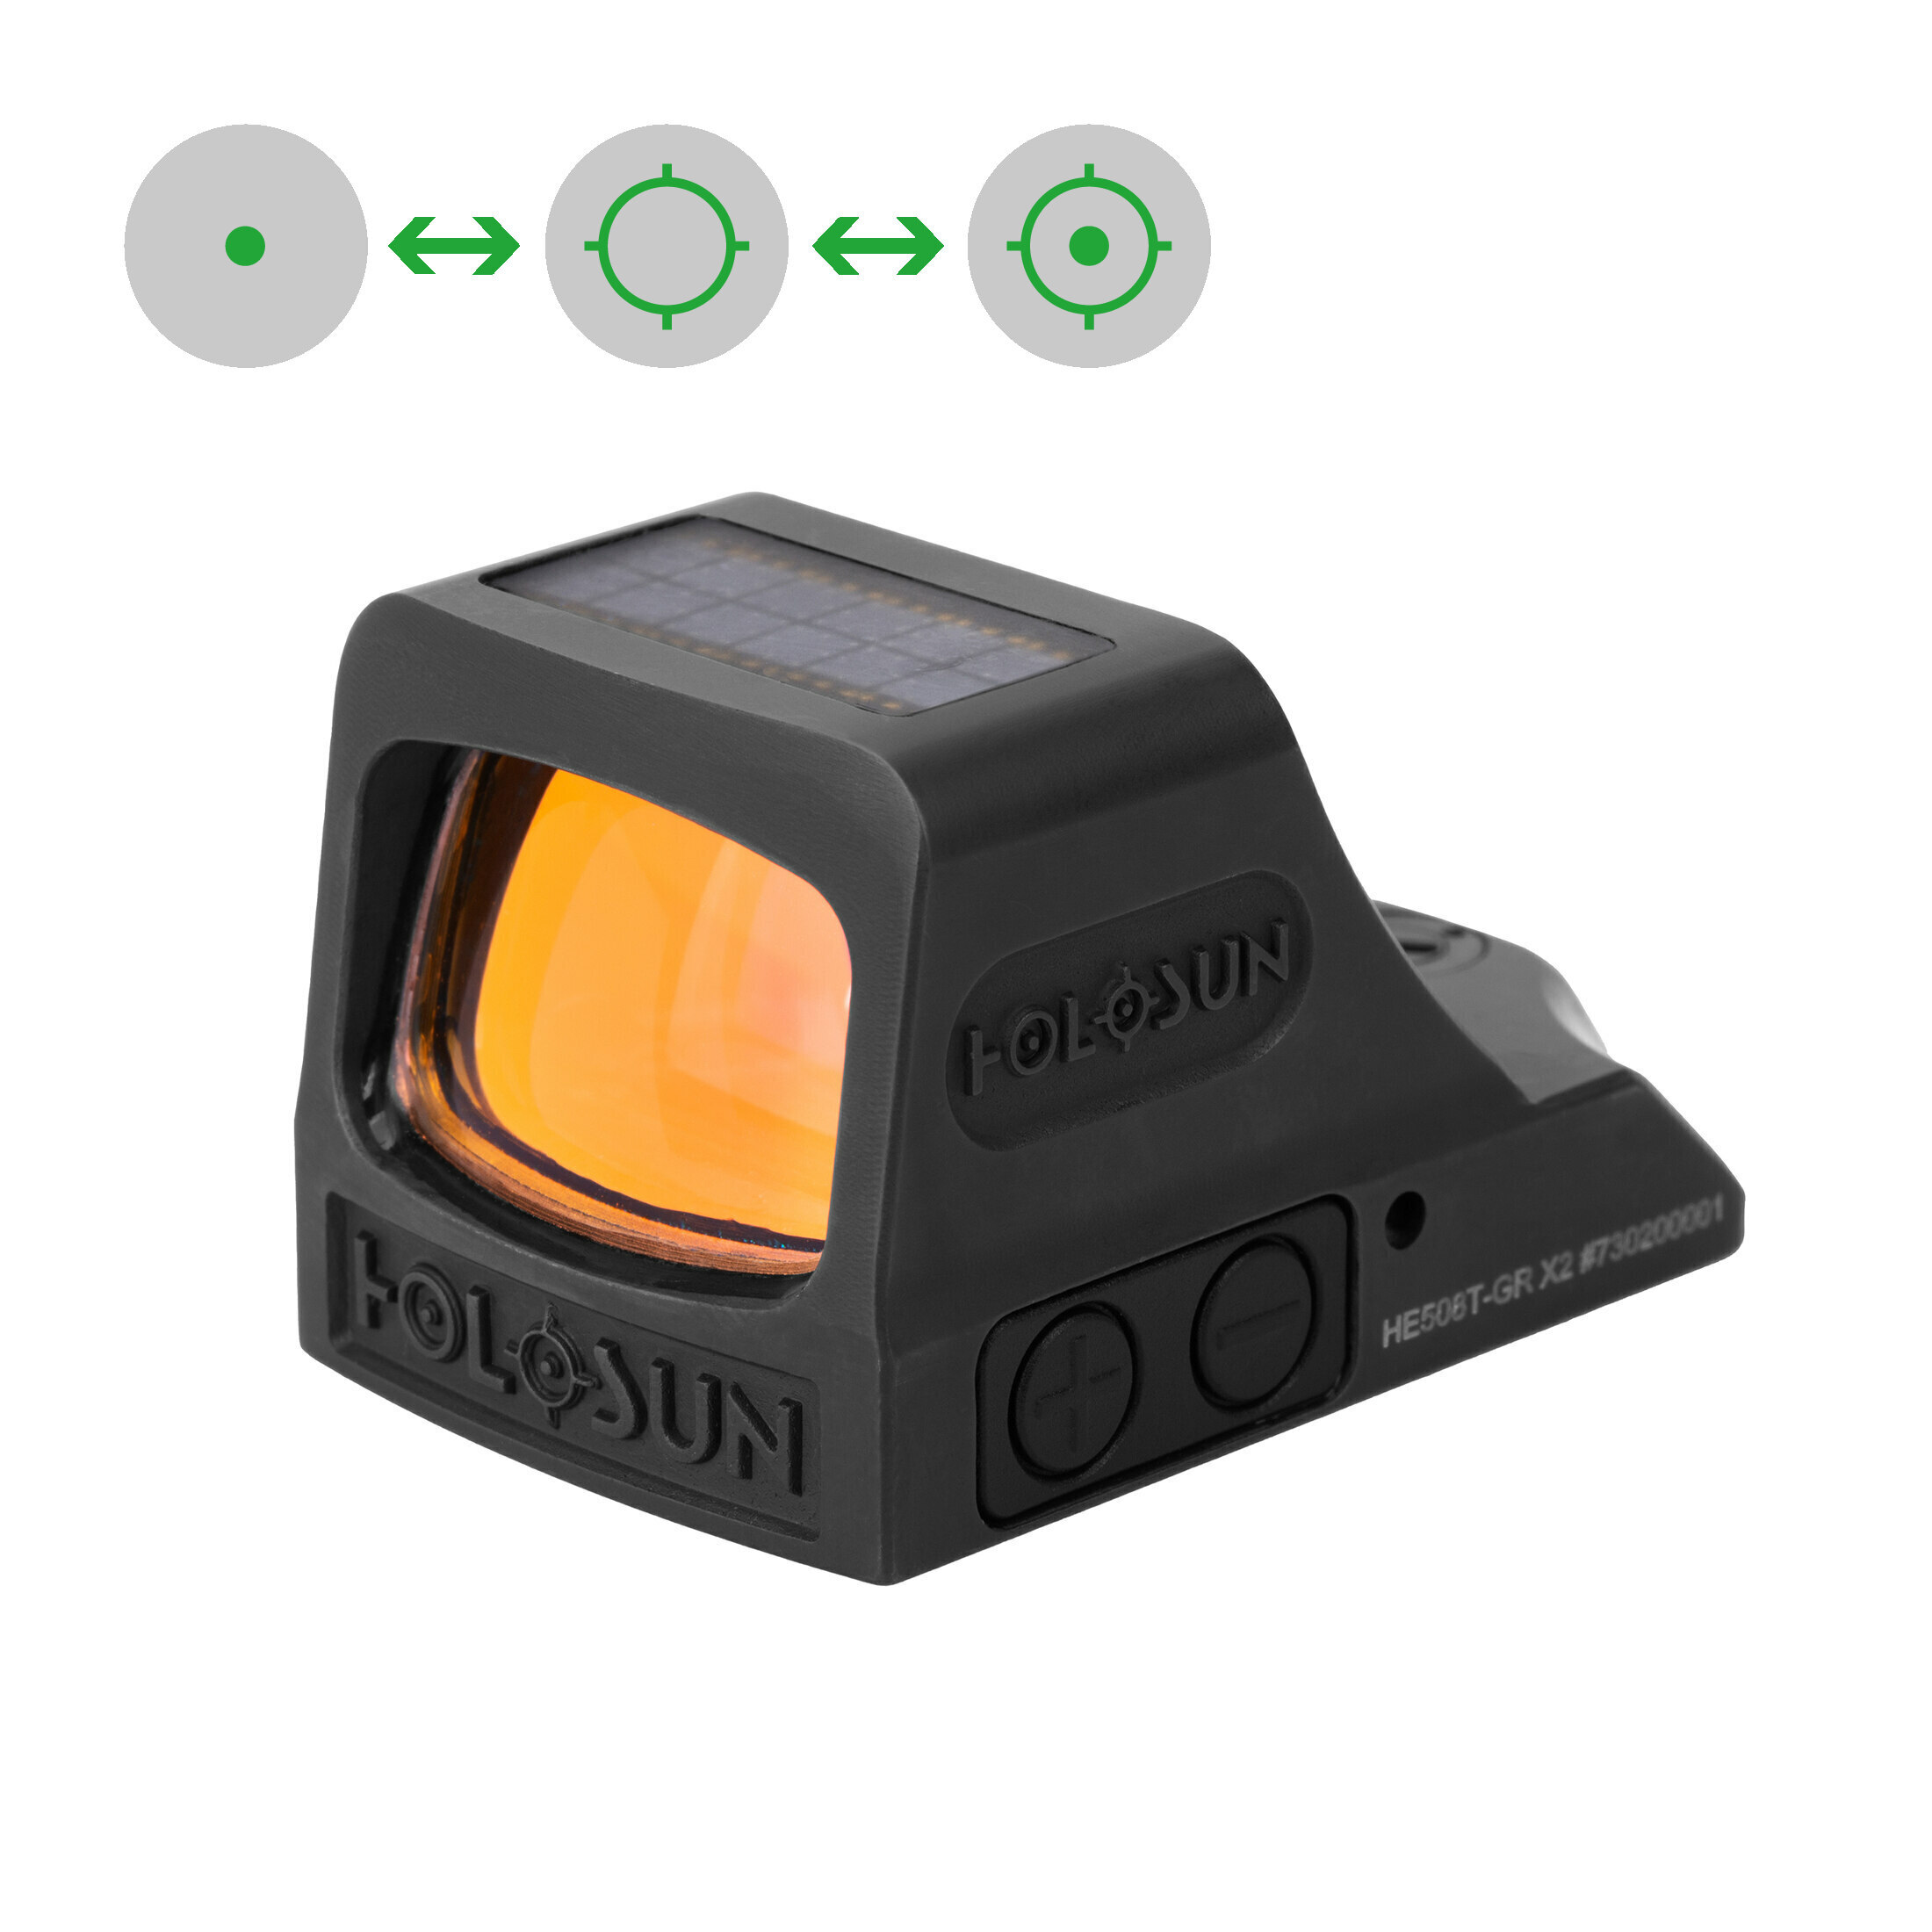 Holosun Open Reflex Green Dot Sight HE508T-GR-X2 with switchable reticle, innovative lock mode and …